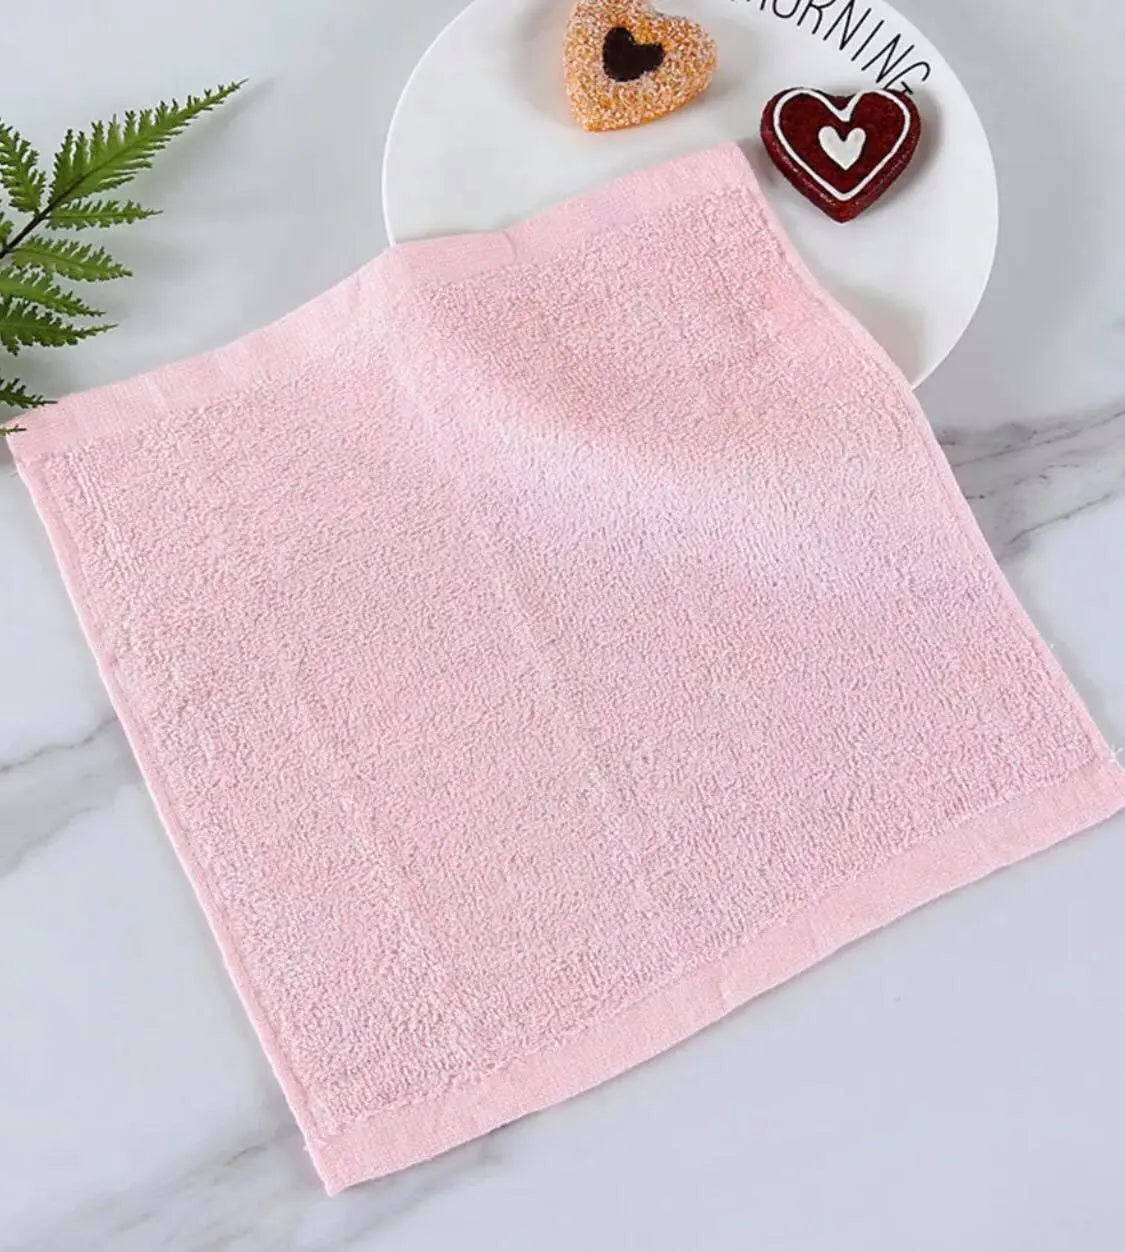 2 X BAMBOO FIBER SQUARE SMALL HAND TOWEL FACE TOWEL SOFT COOL COMFORTABLE everythingbamboo